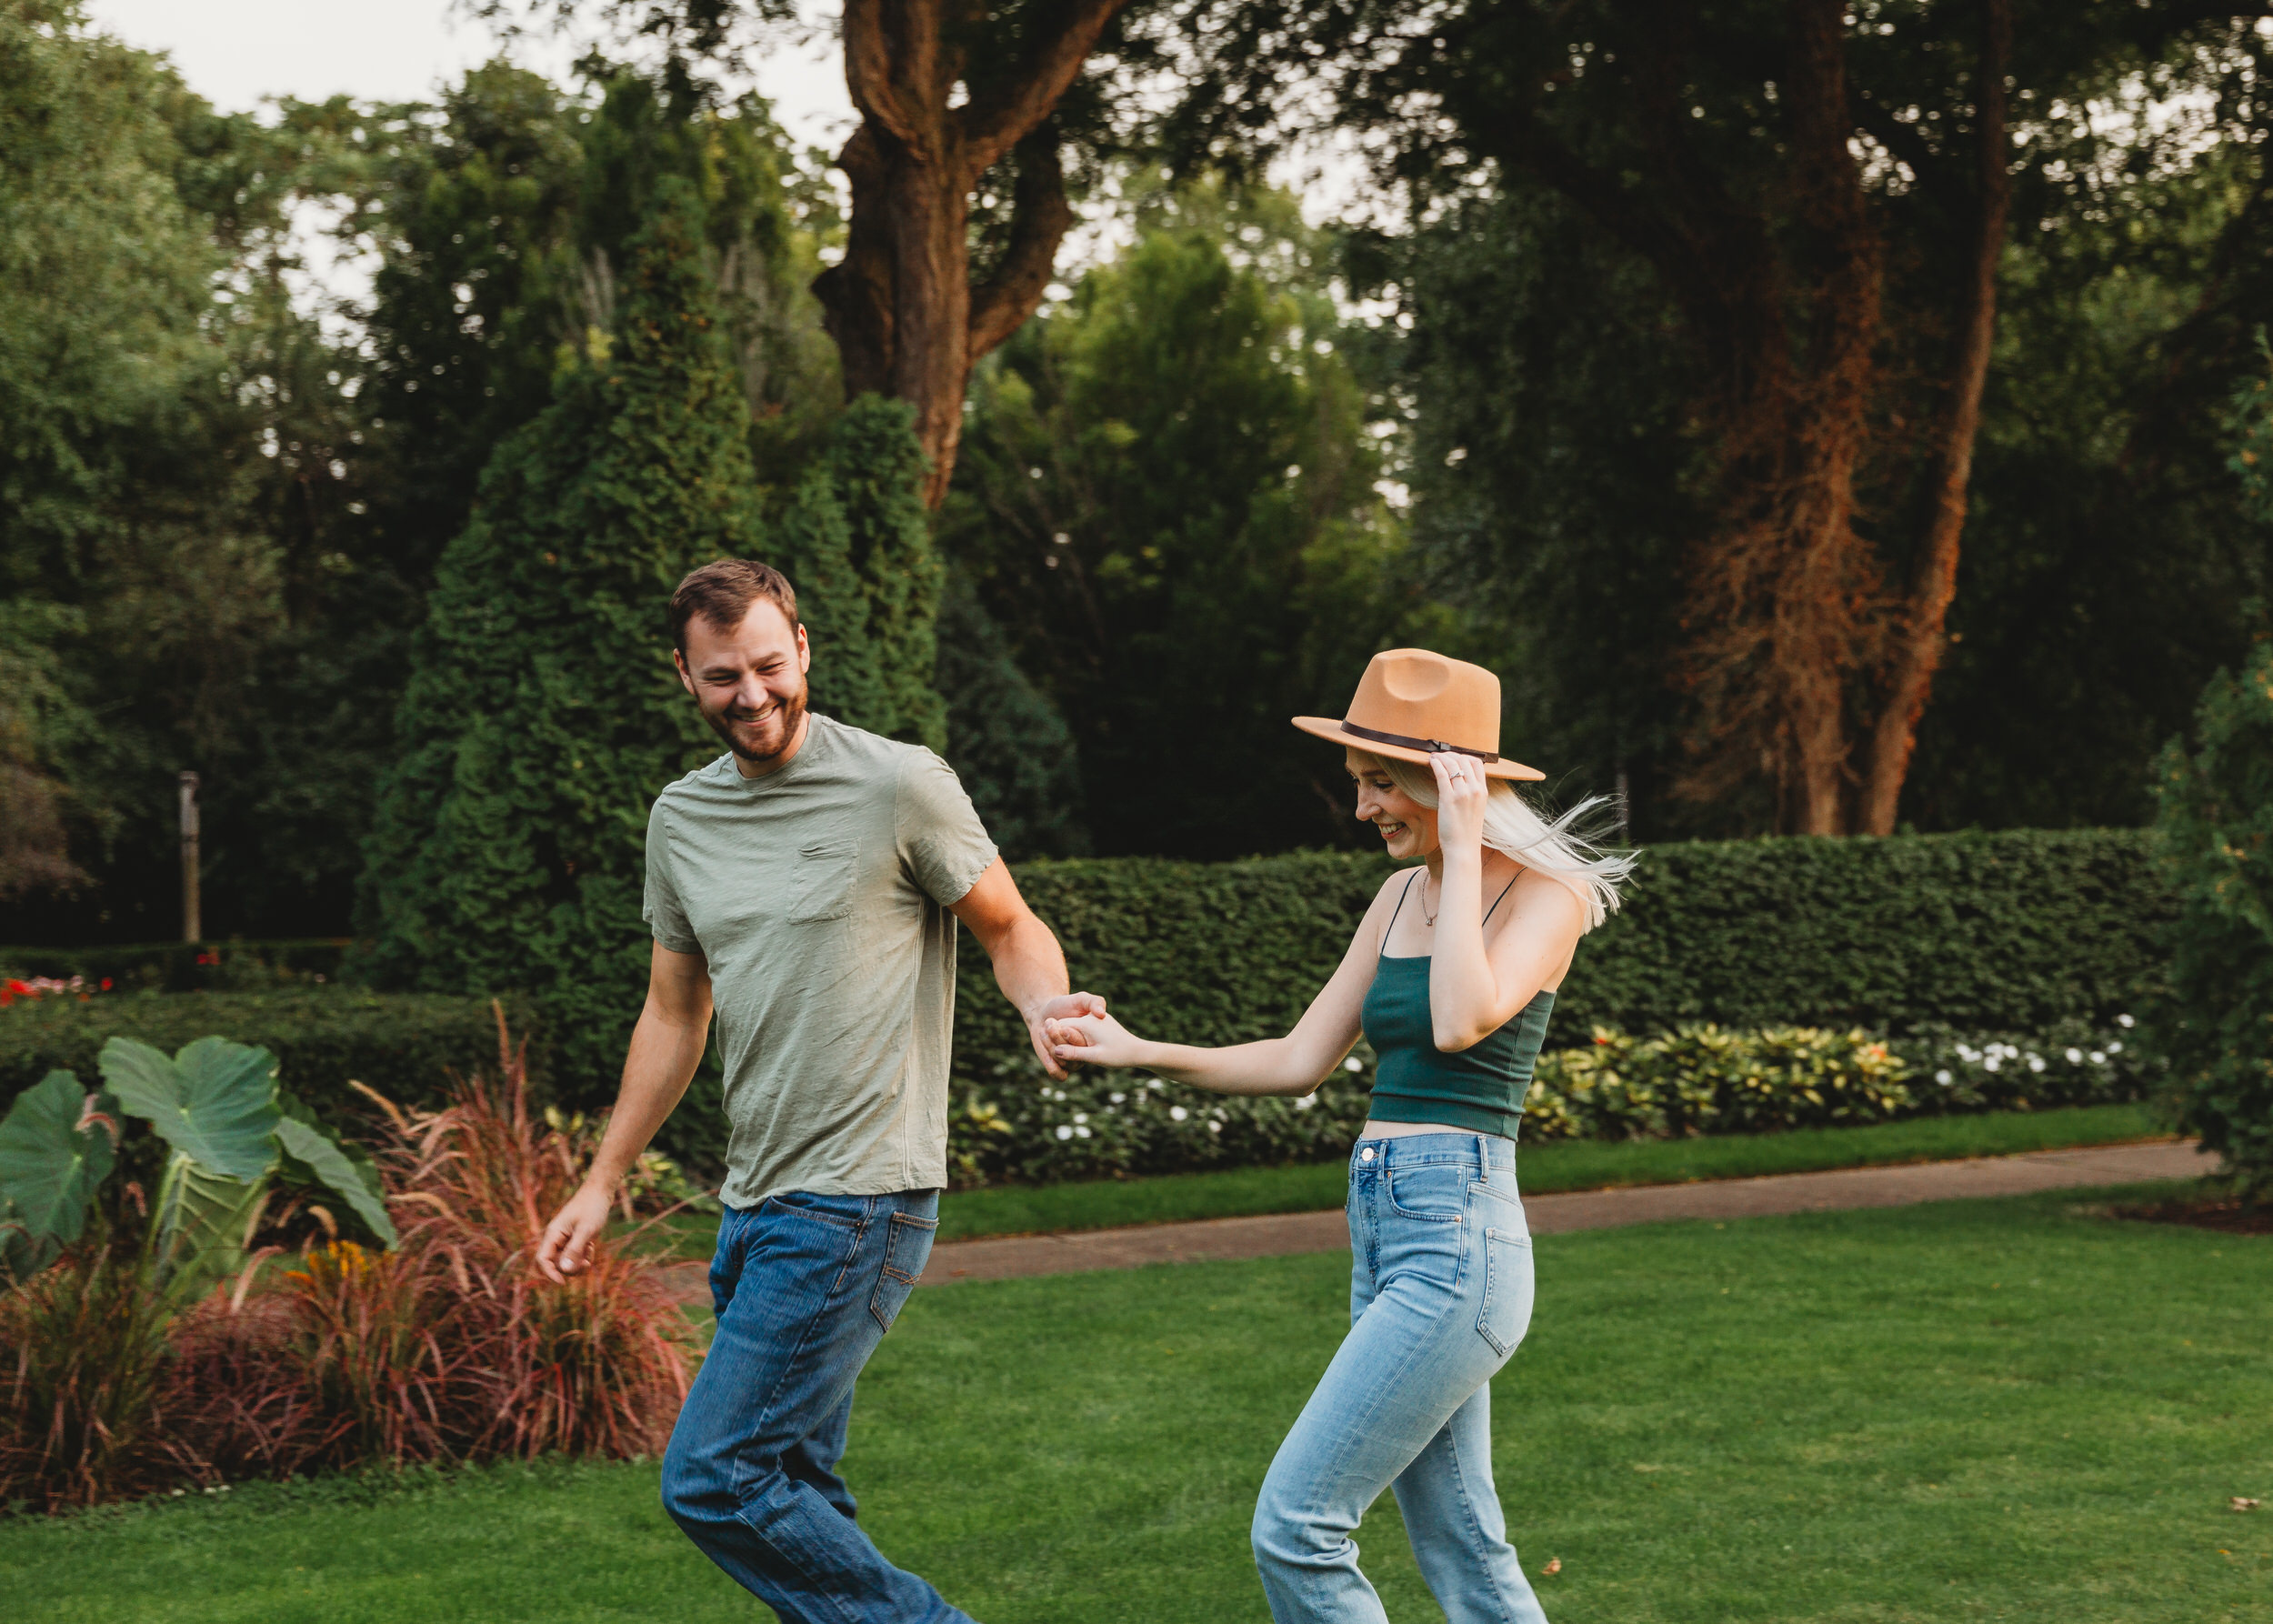 Man and woman walk hand in hand in a Michigan garden